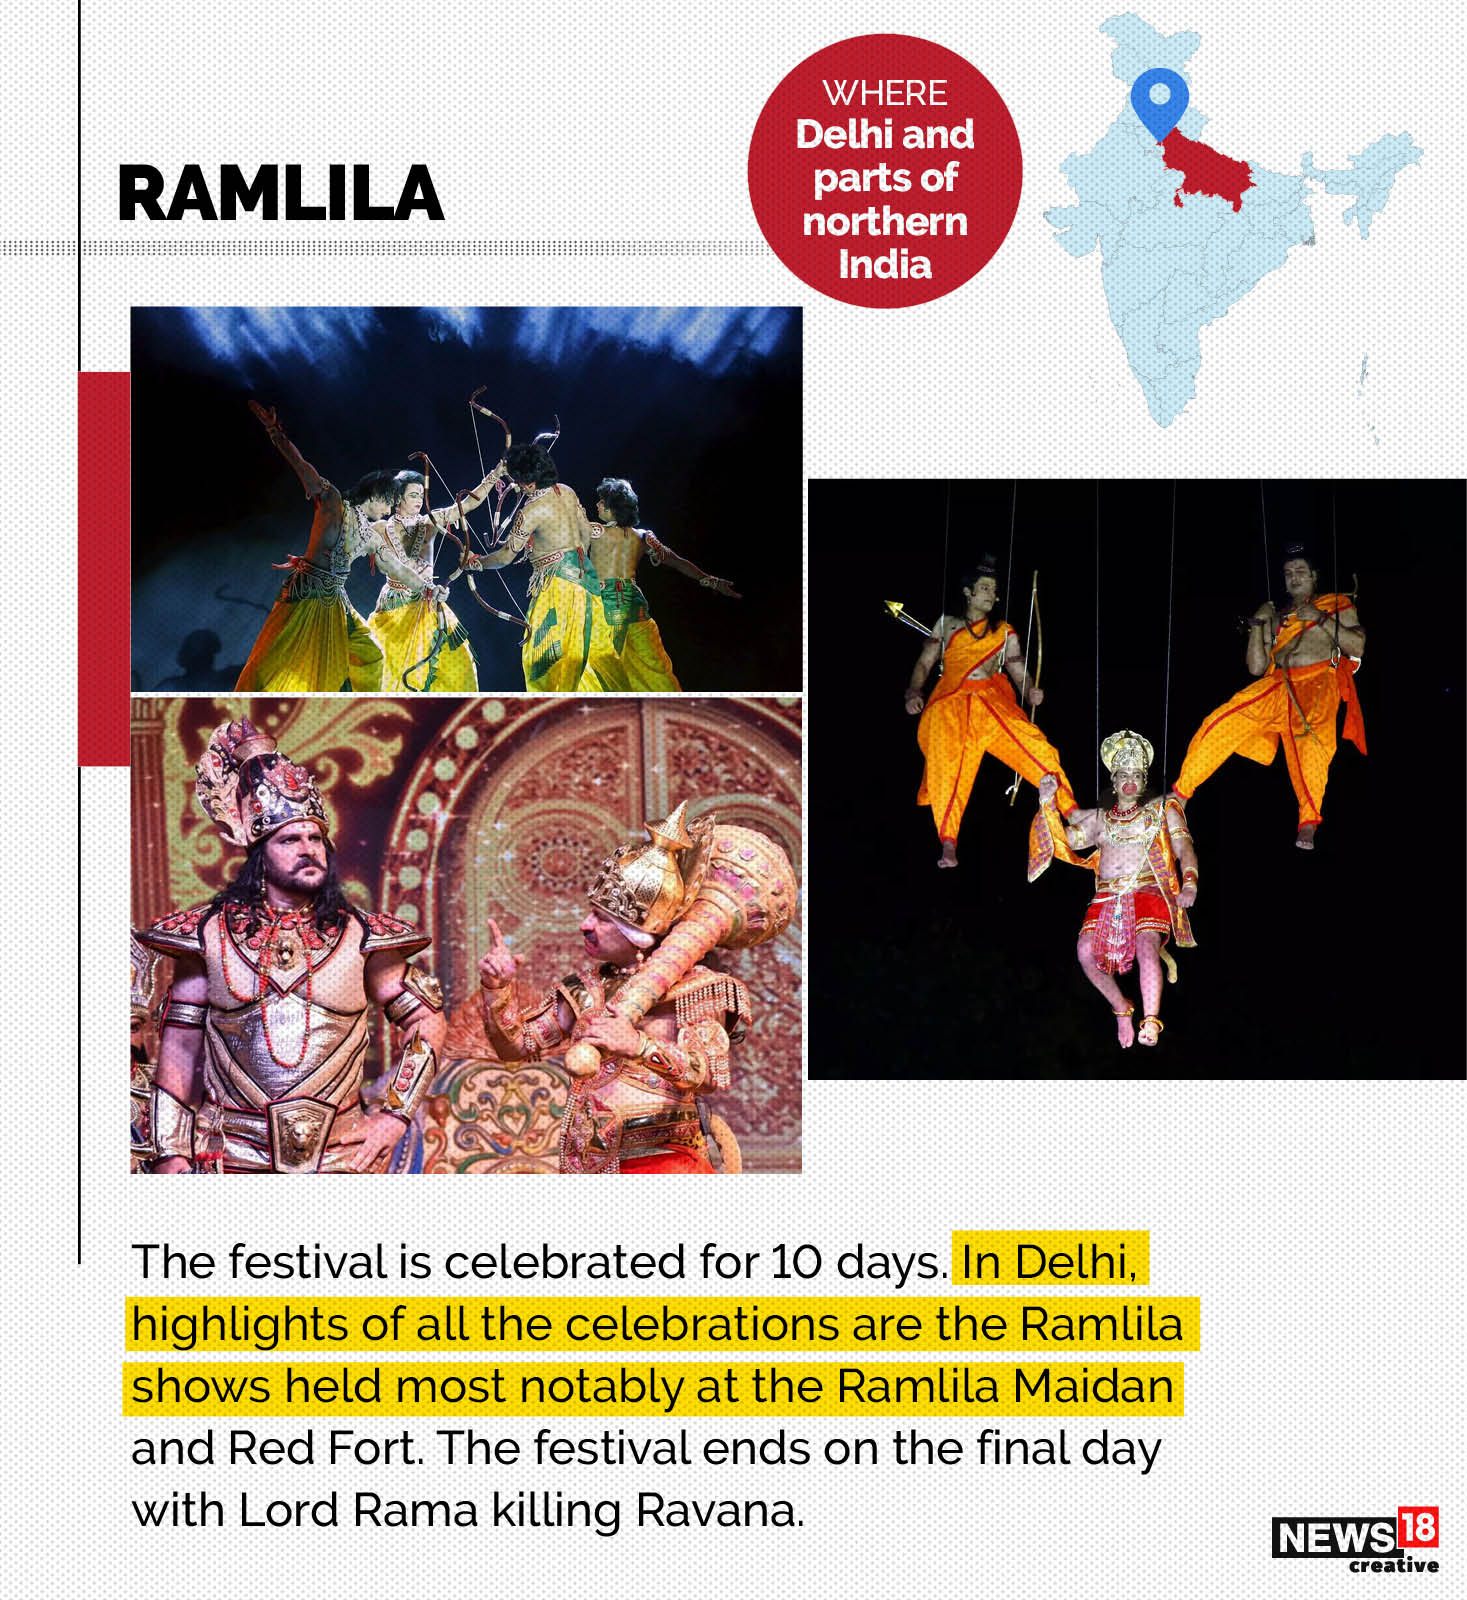 In Delhi, highlights of all the celebrations are the Ramlila shows held mostly at the Ramlila Maidan and Red Fort. (Image: news18 Creative)